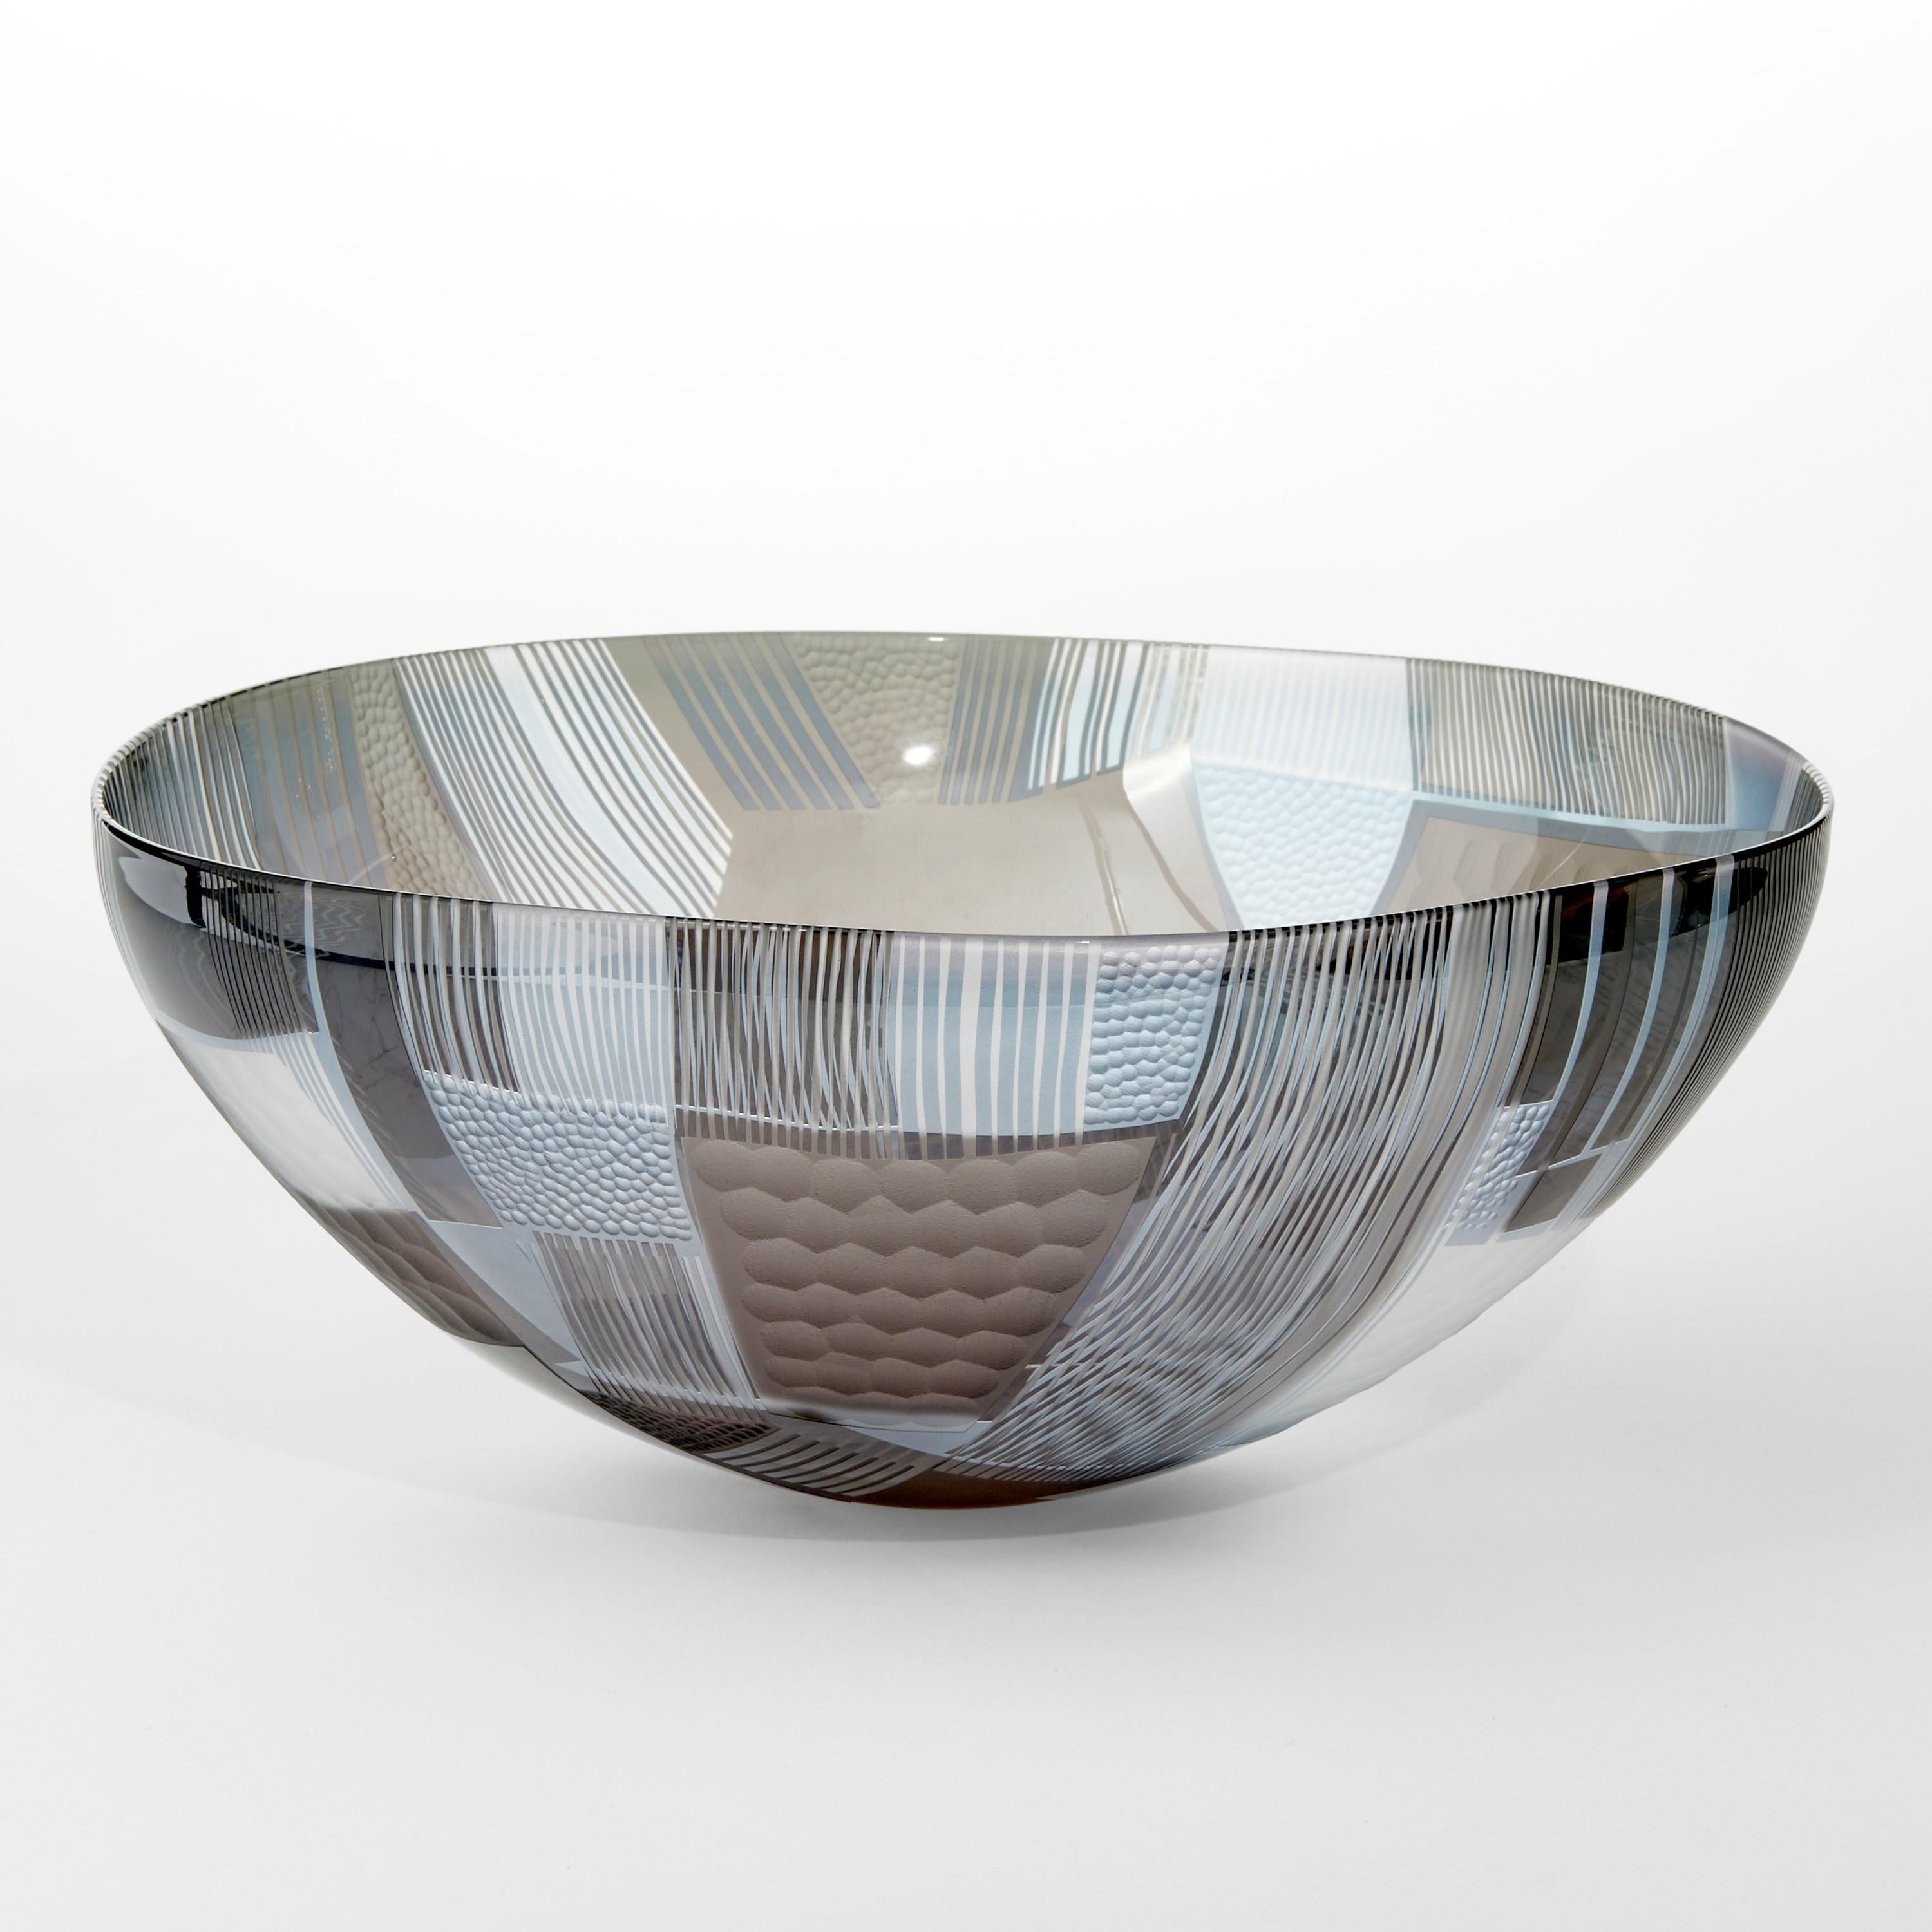 'Abstracted Land Winter Blue over Sky Grey' is a unique handblown and cut glass artwork by the British artist, Kate Jones of Gillies Jones.

In the artist's own words:

“This new body of work references both the evident structure of the landscape